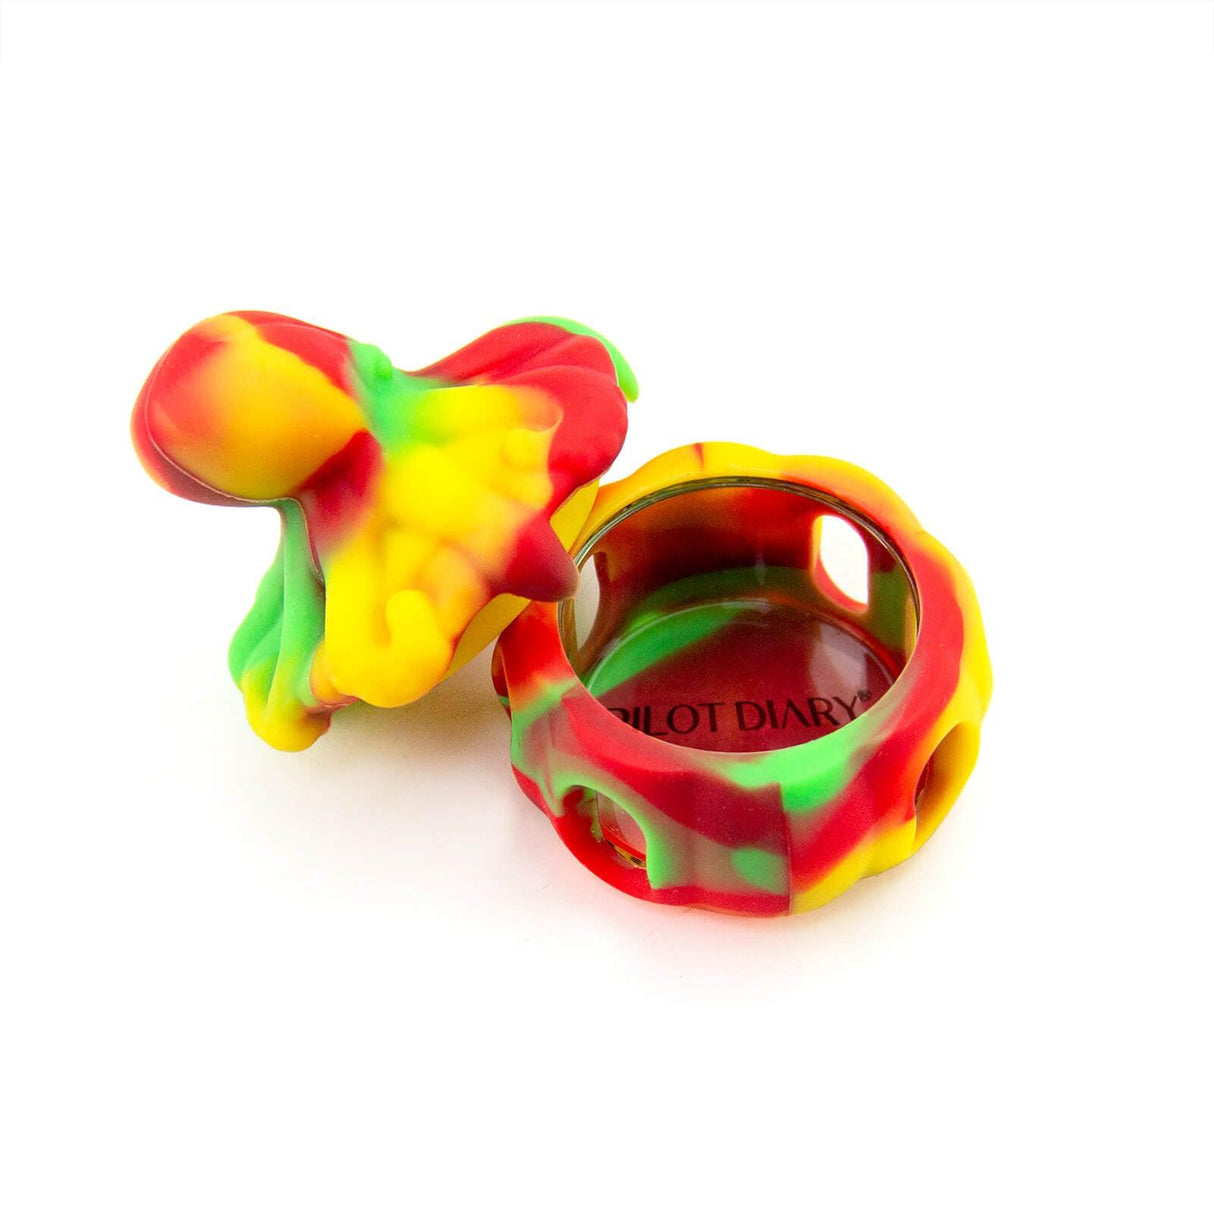 PILOT DIARY Octopus Silicone Dab Container 10ml in Vibrant Colors, Front View